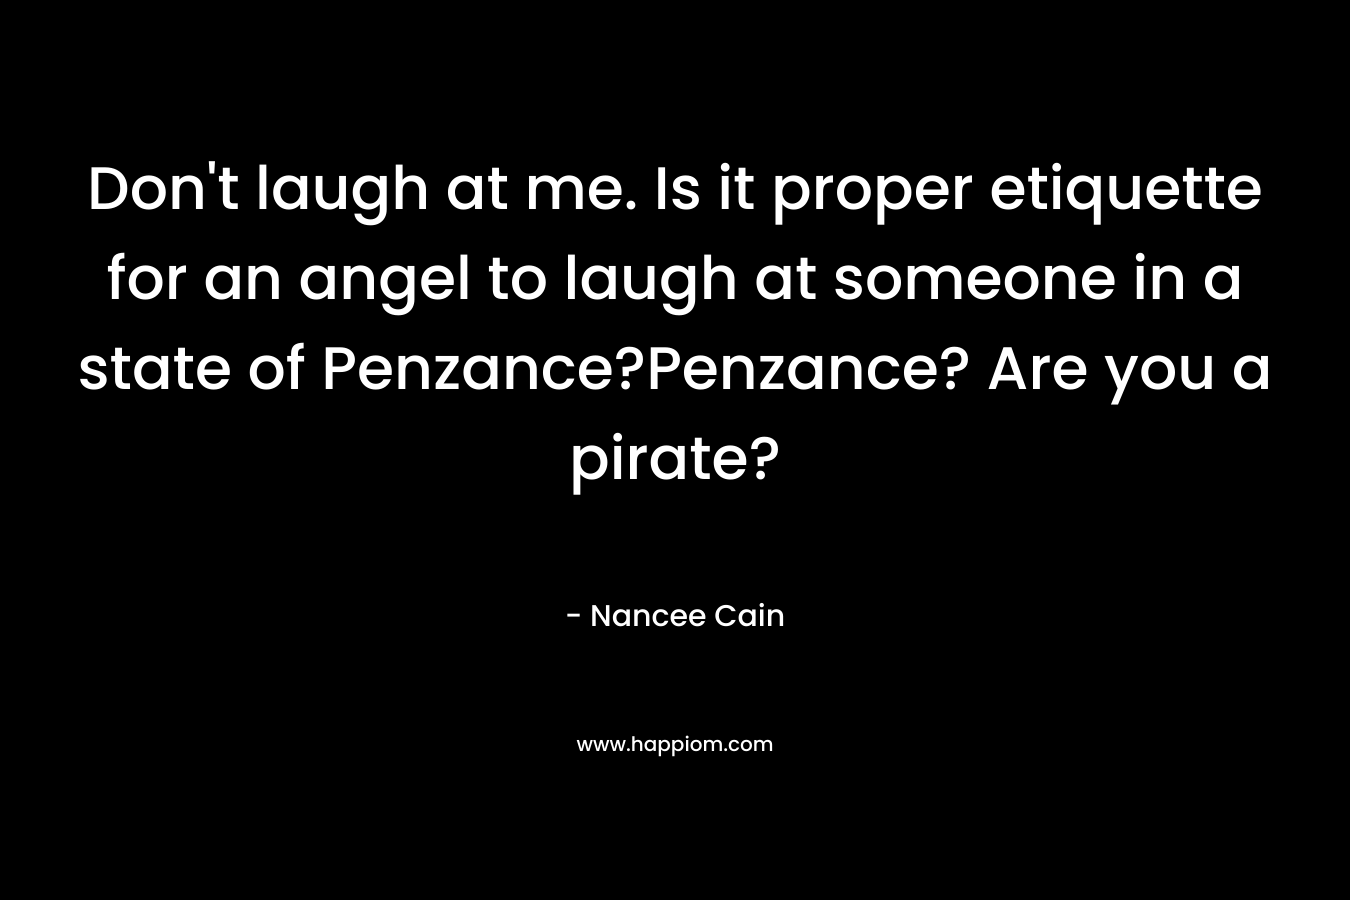 Don't laugh at me. Is it proper etiquette for an angel to laugh at someone in a state of Penzance?Penzance? Are you a pirate?